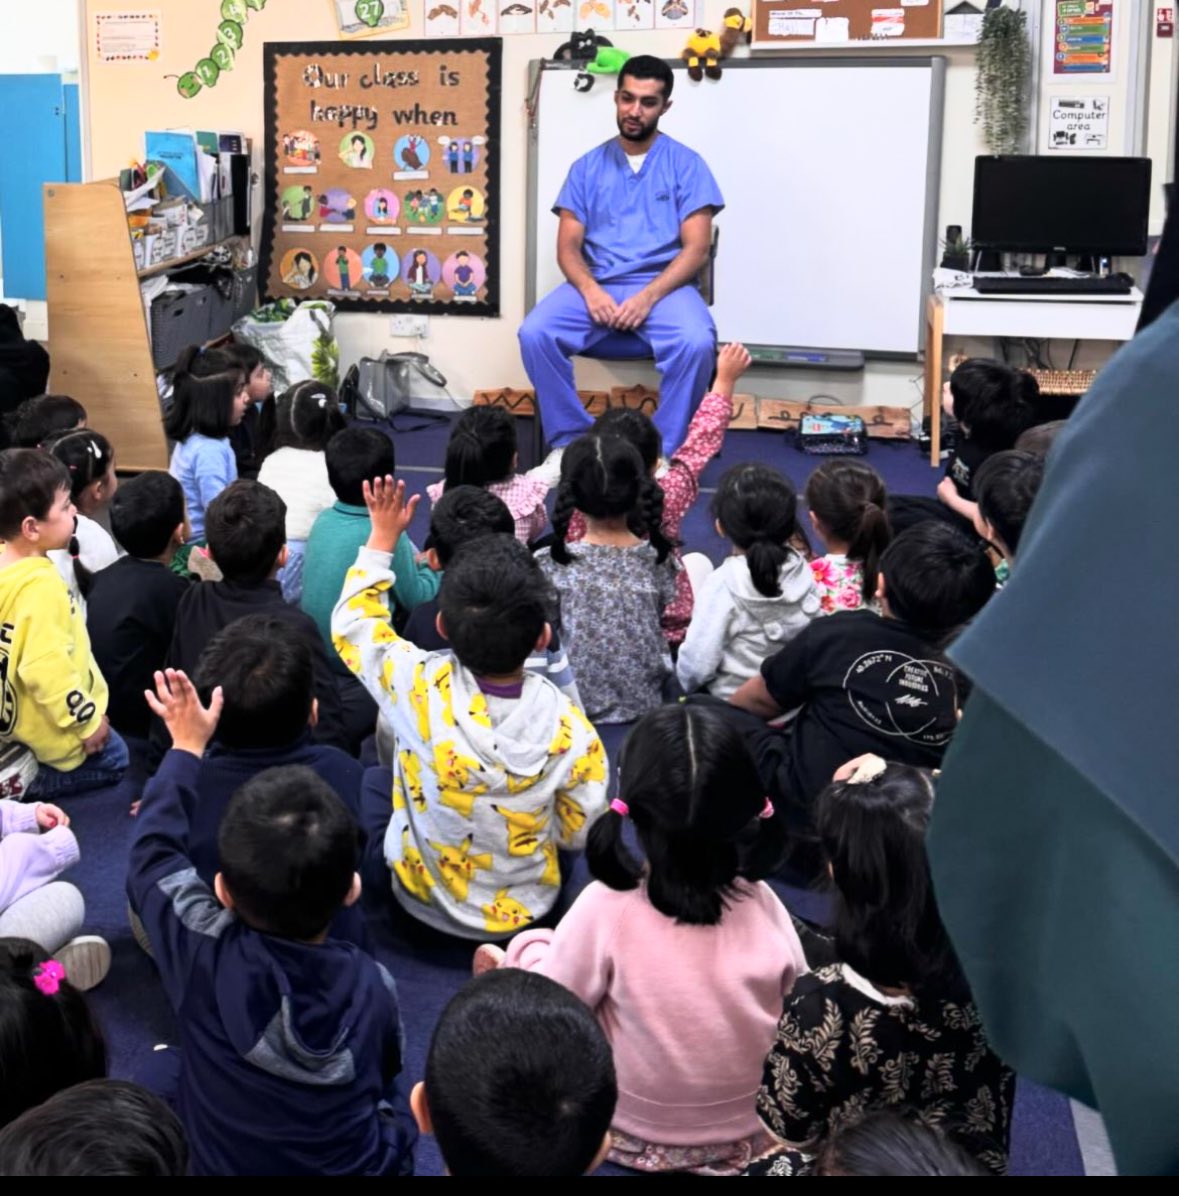 At Edenfield Nursery, children have been thinking and learning about dental hygiene this week. Thank you to Salik Khan from dentistry4all for coming to speak to the children #dentalhygiene